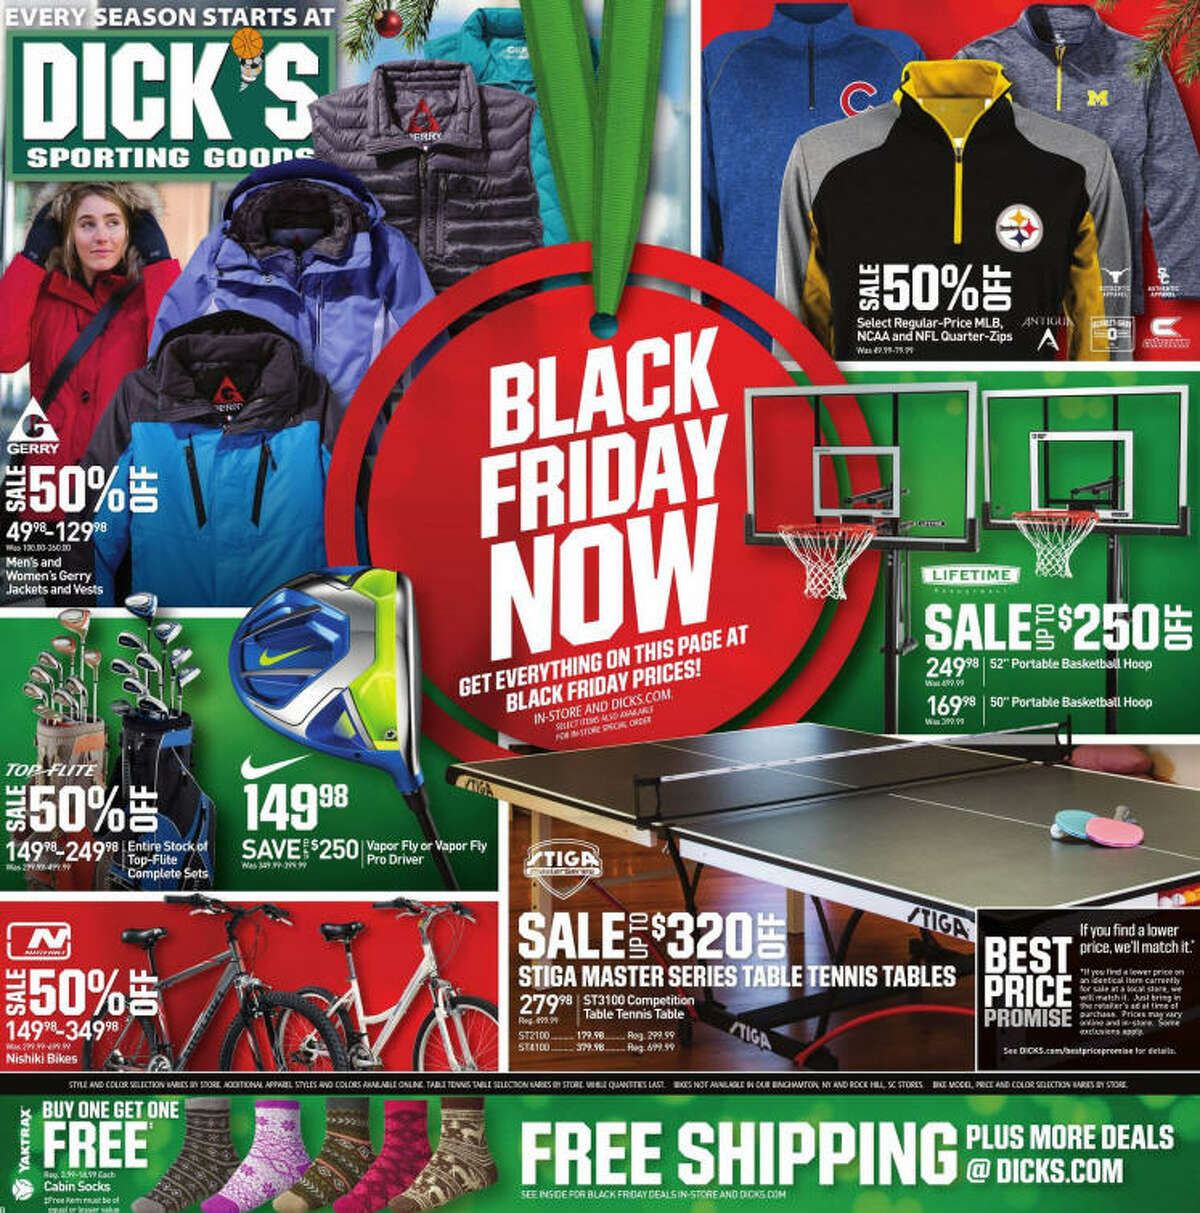 Dicks Sporting Goods Black Friday 2016 Deals You Can Shop Now 